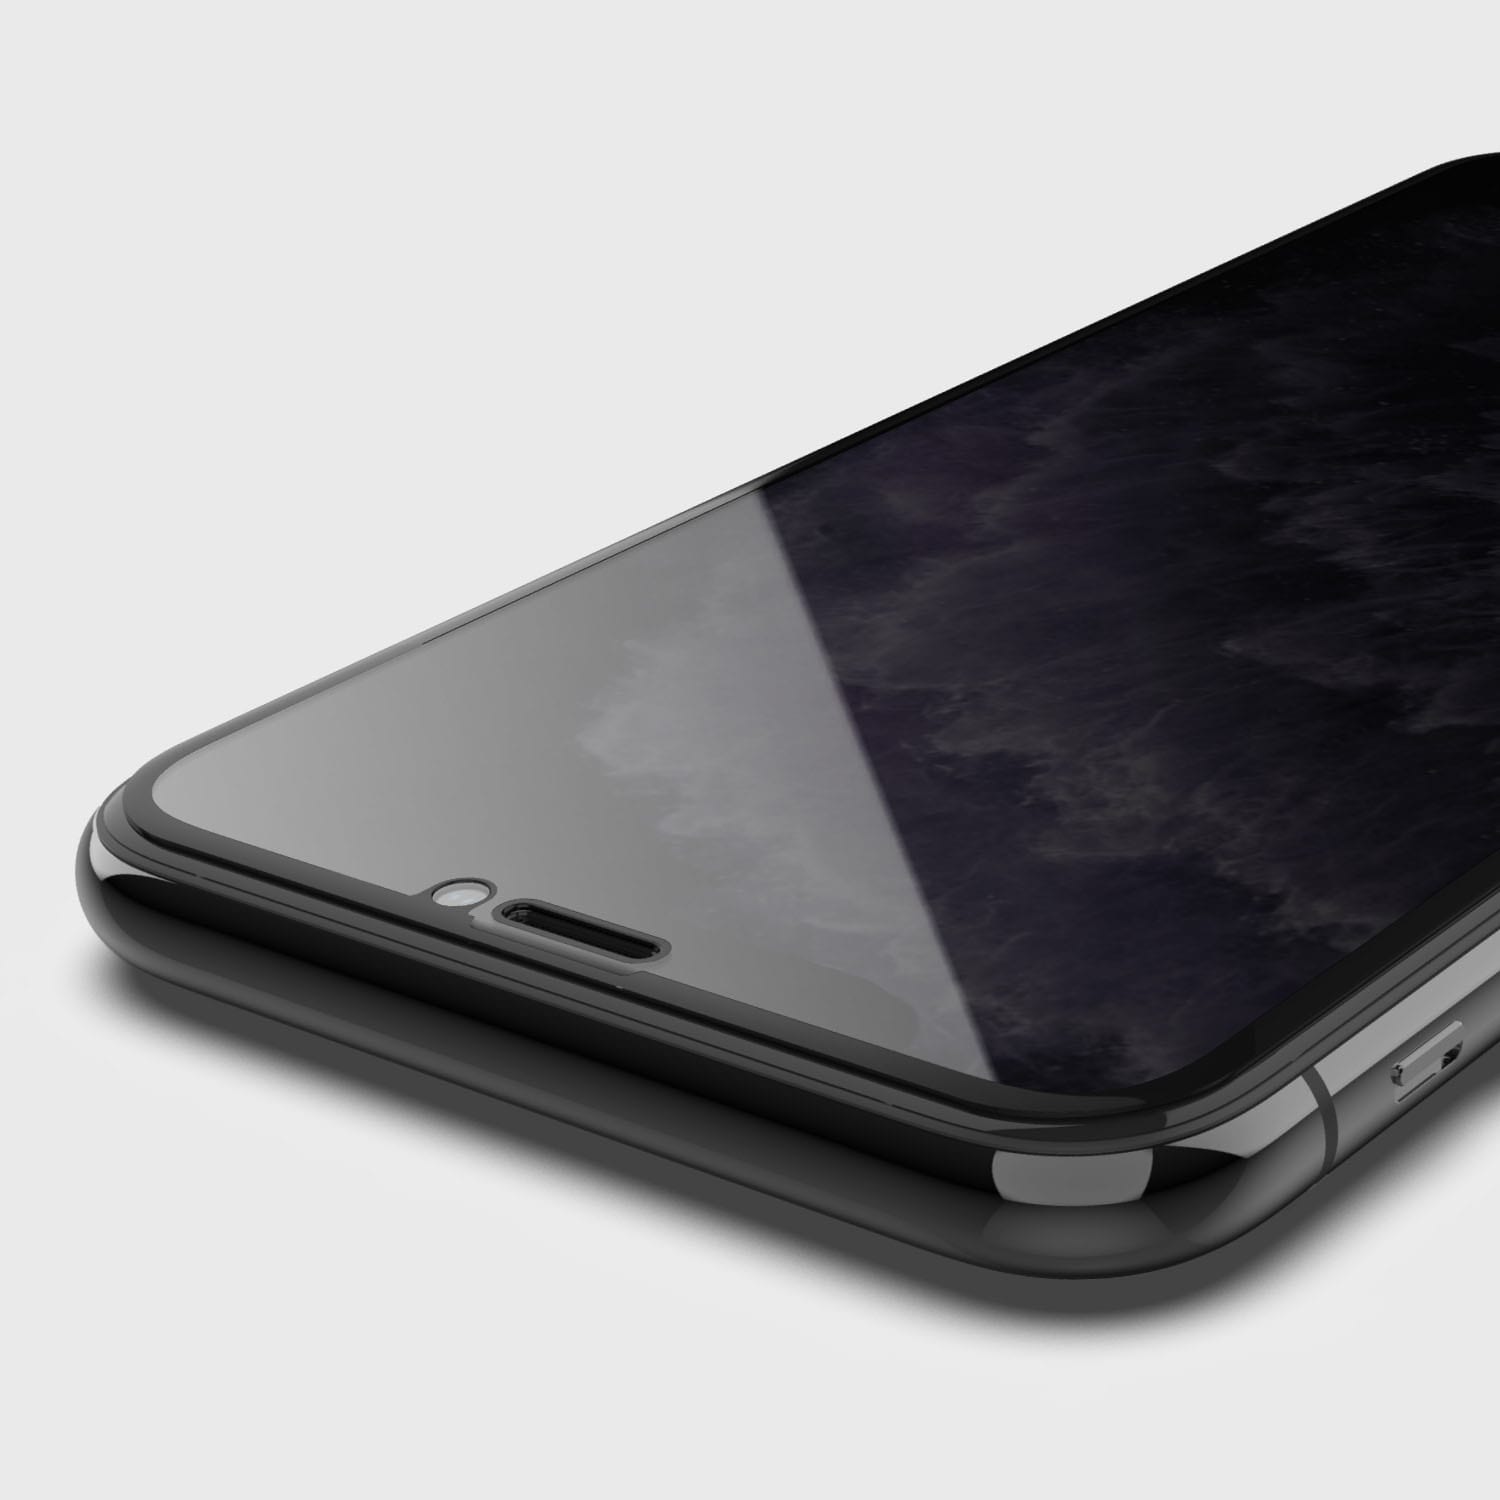 The back view of an iPhone 11 with a black screen is enhanced with a thin protective layer, ensuring iPhone screen protection through Raptic's iPhone 13 Pro Screen Protector - PRIVACY, made of 9H tempered glass.